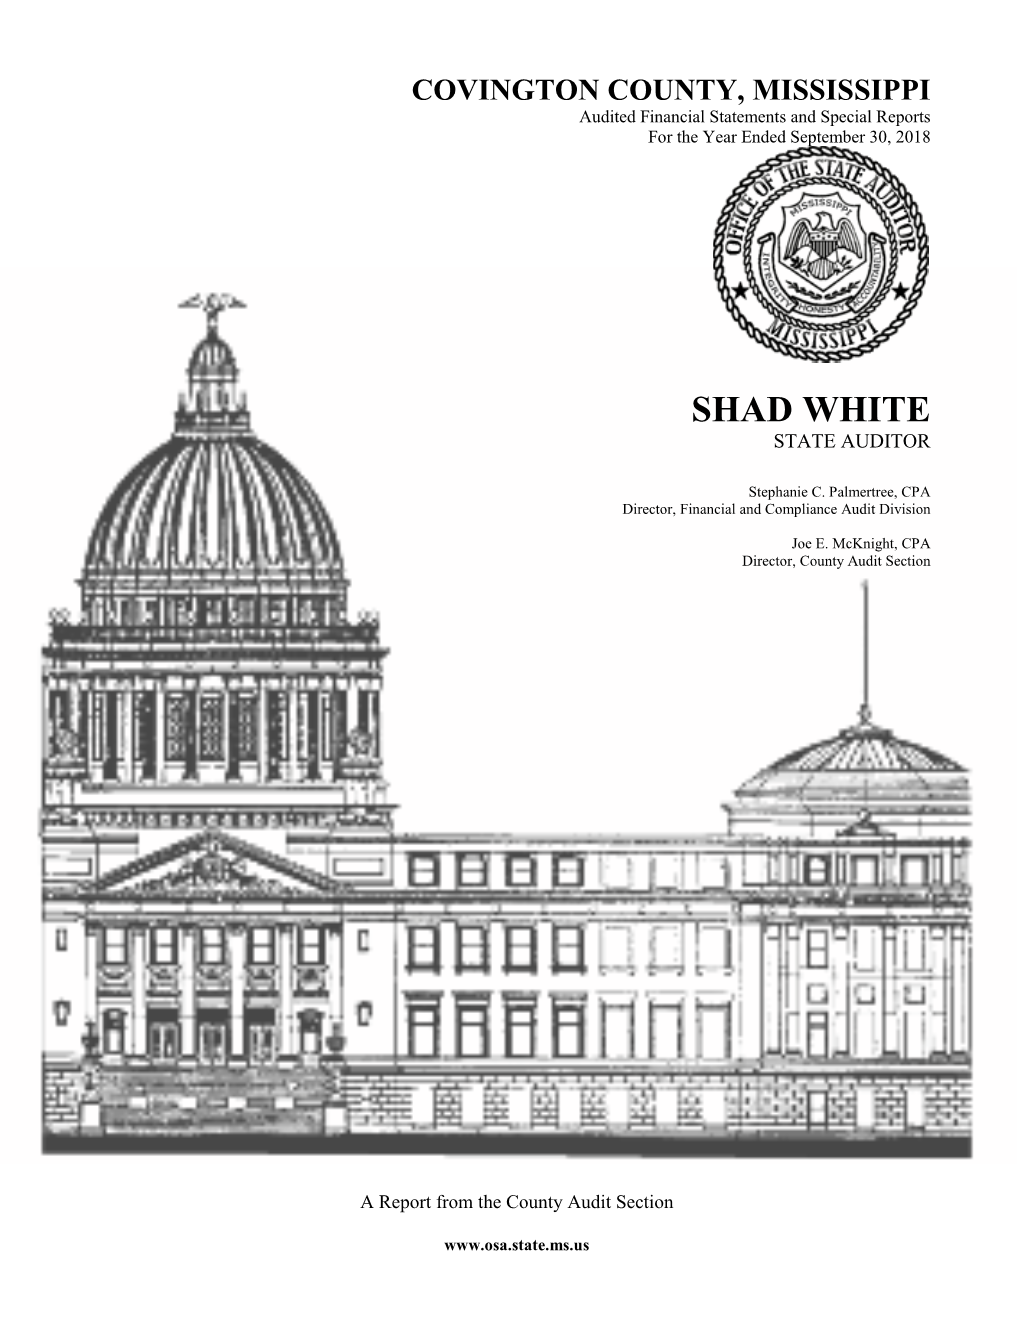 Shad White State Auditor